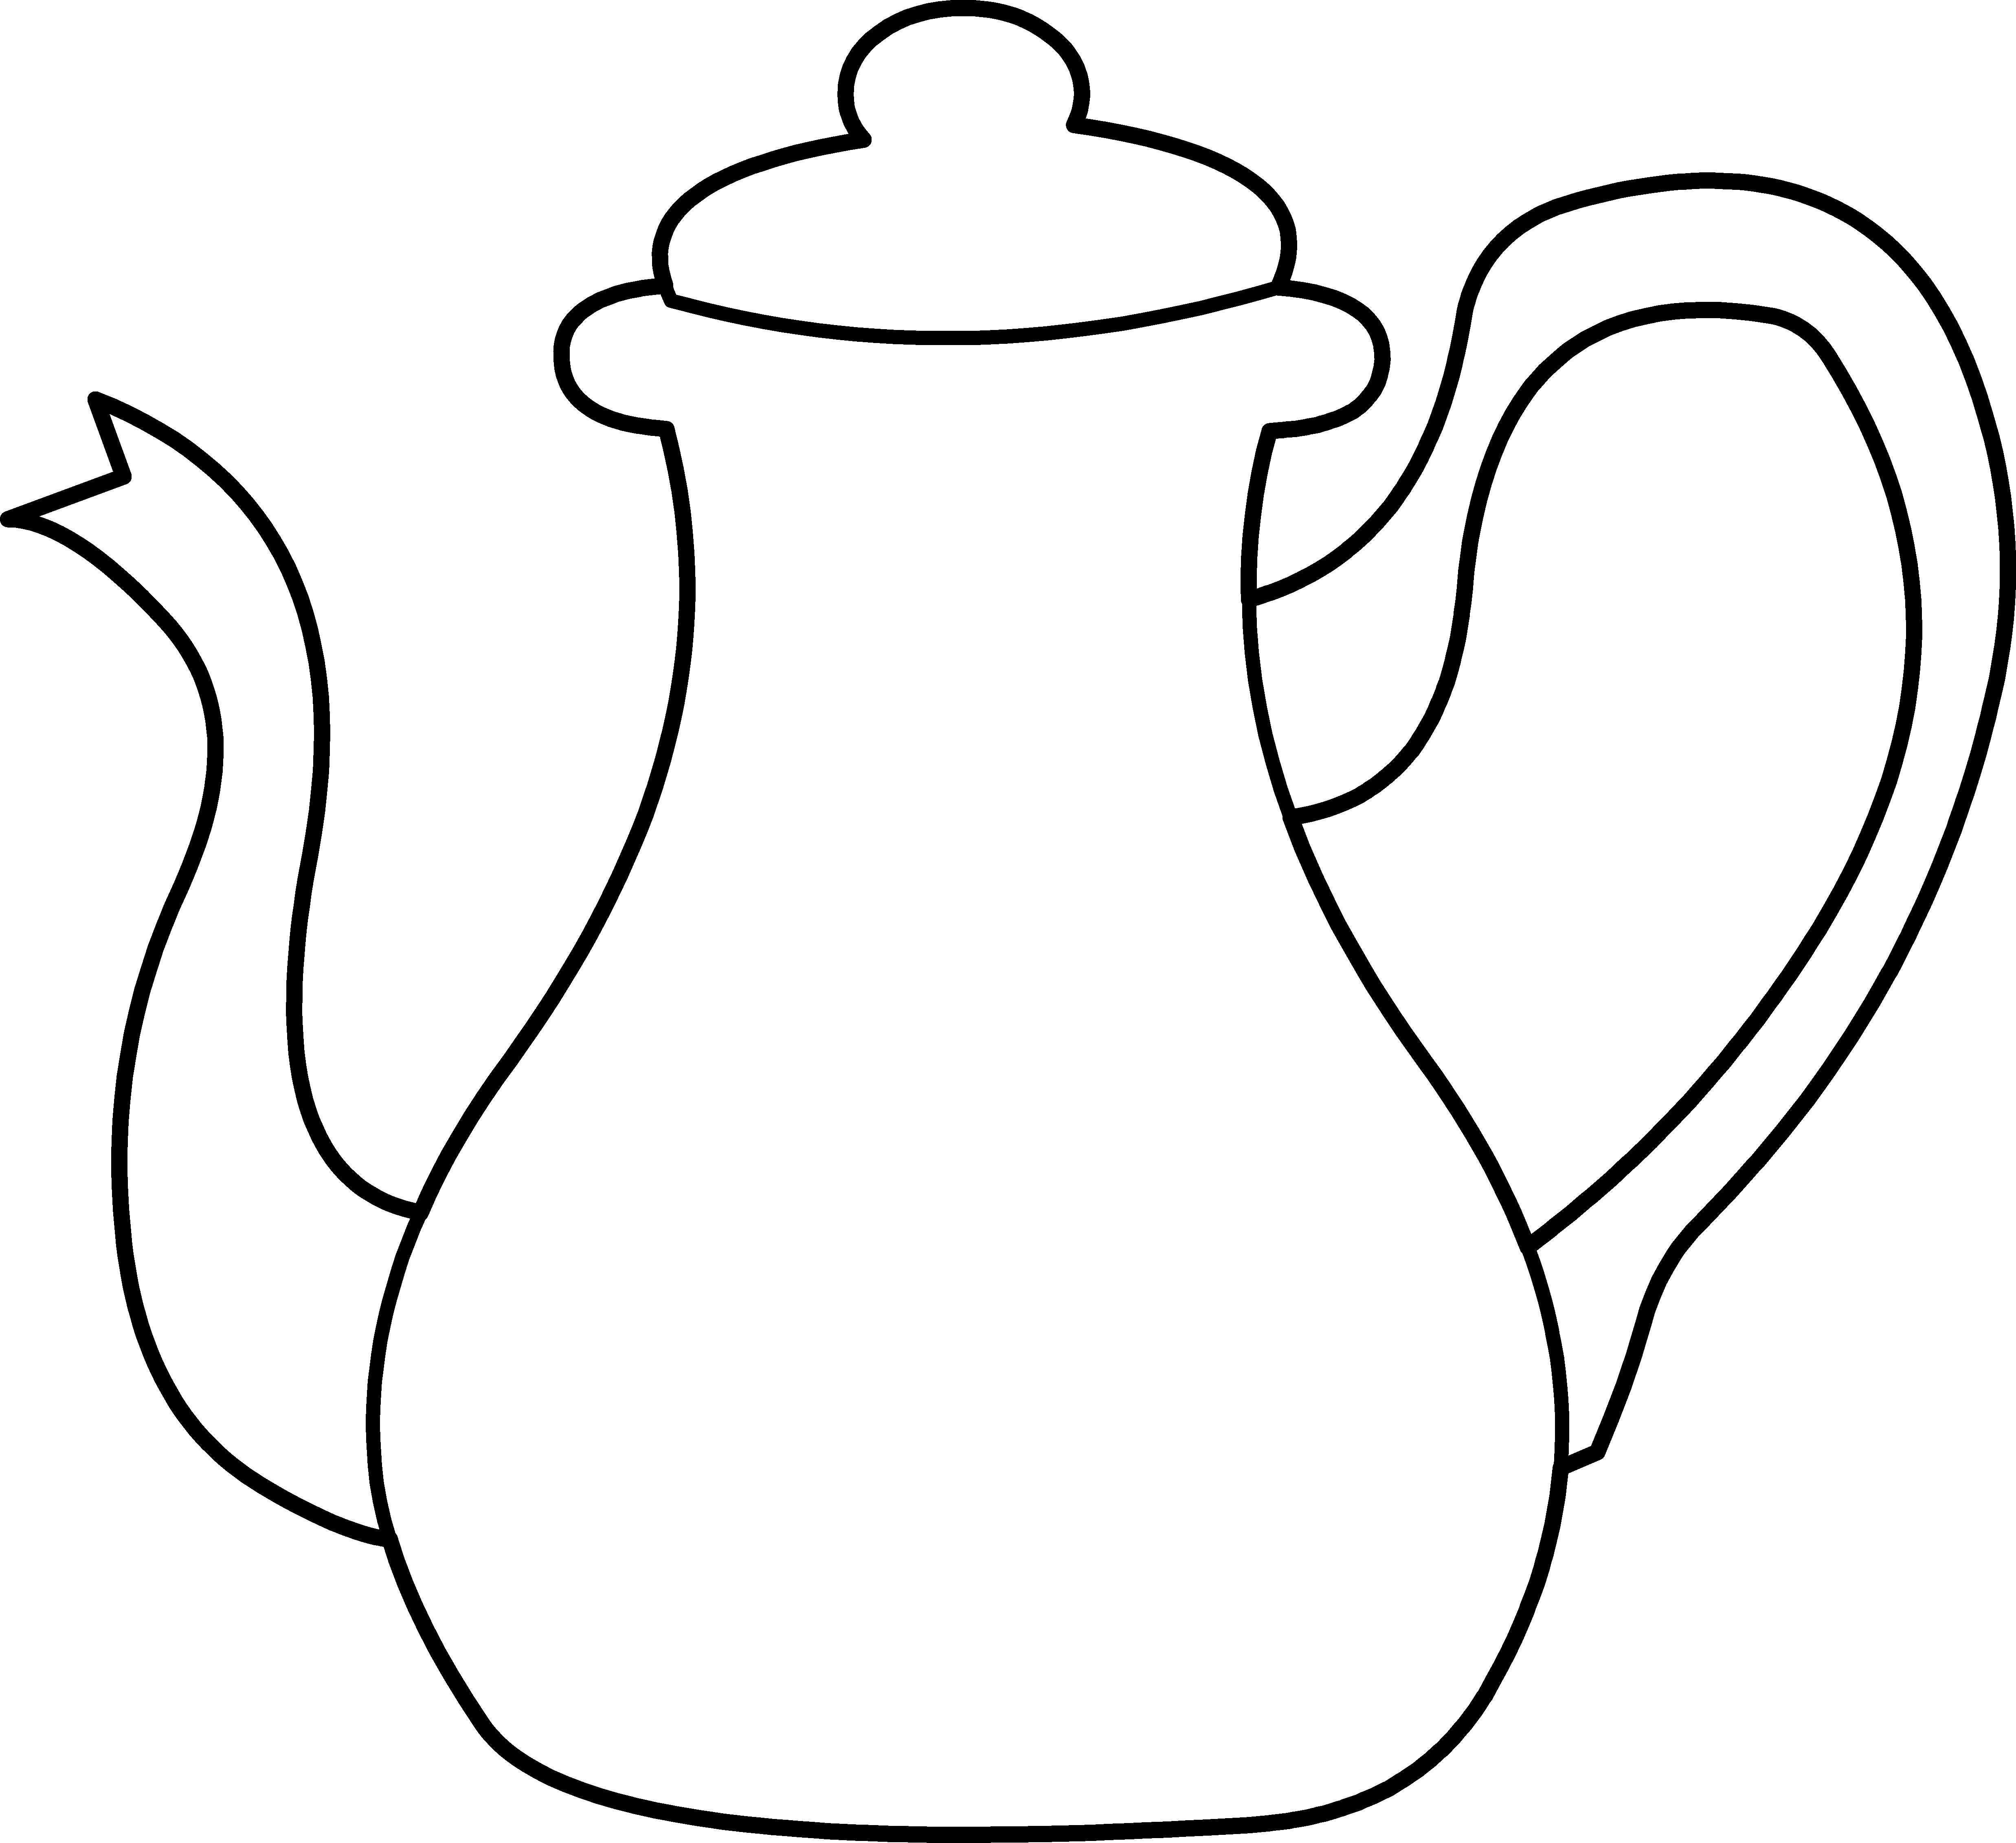 Images For > Teacup Silhouette Clip Art